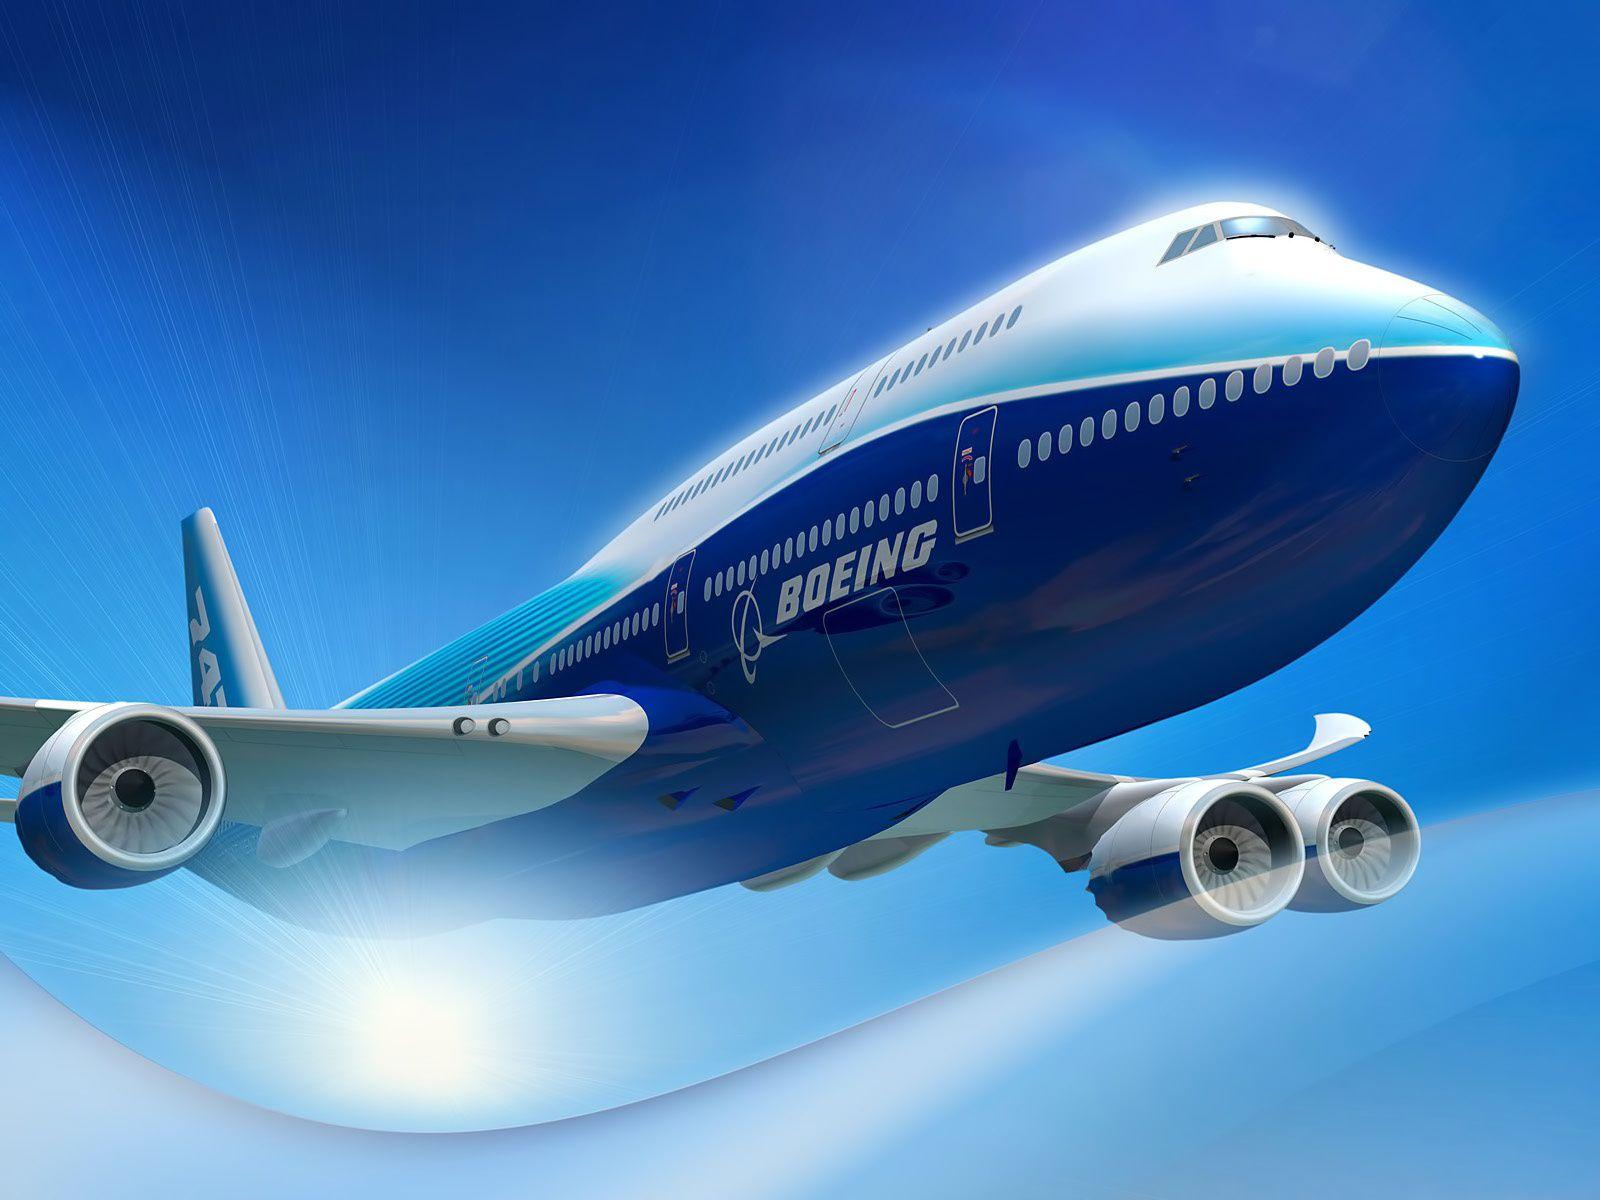 Wallpaper.wiki Boeing HD Background PIC WPB0014100